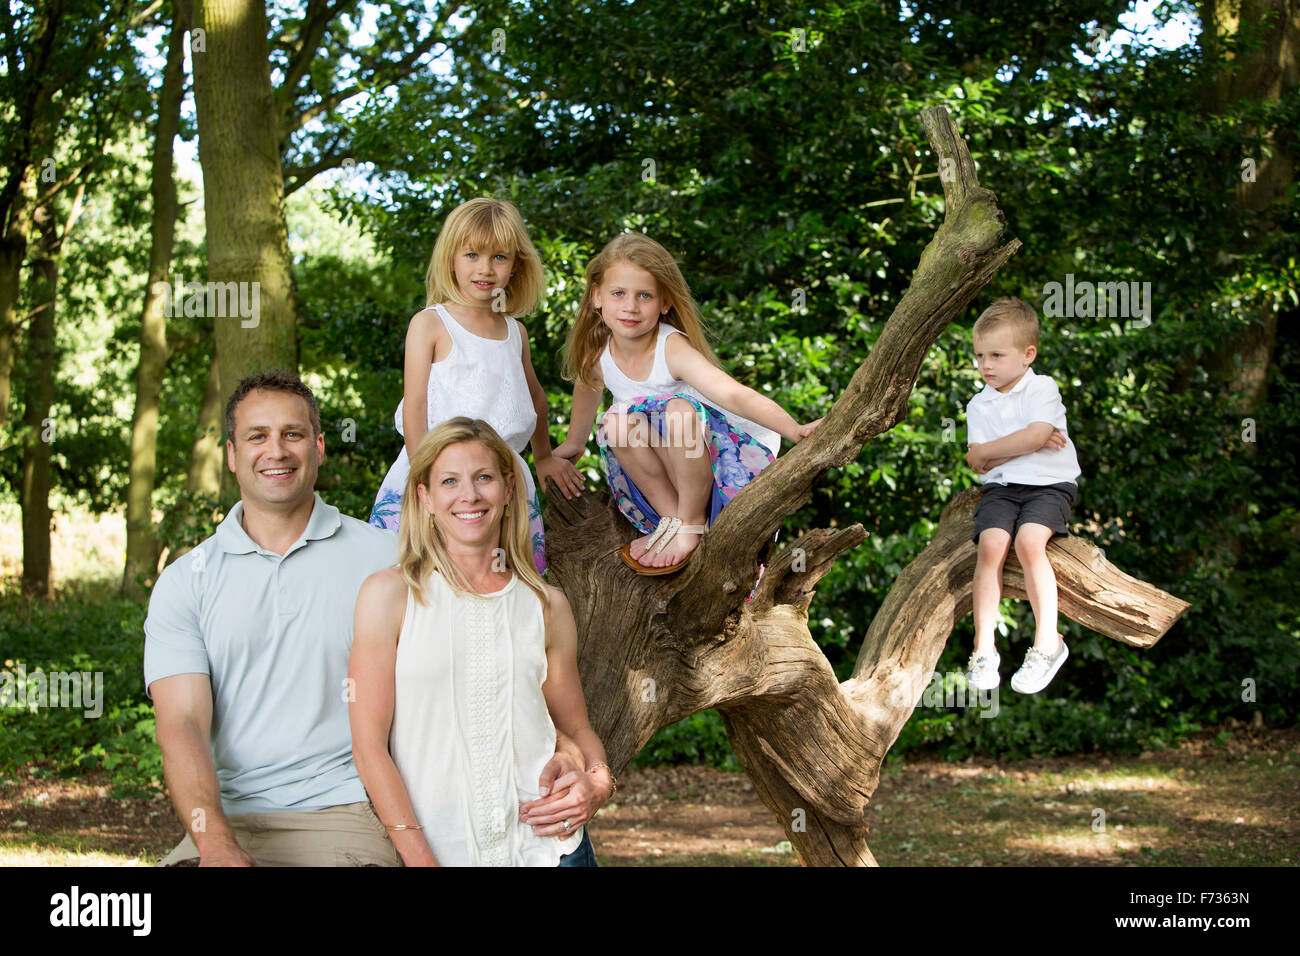 Family with three children by a tree in a forest, posing for a picture. Stock Photo